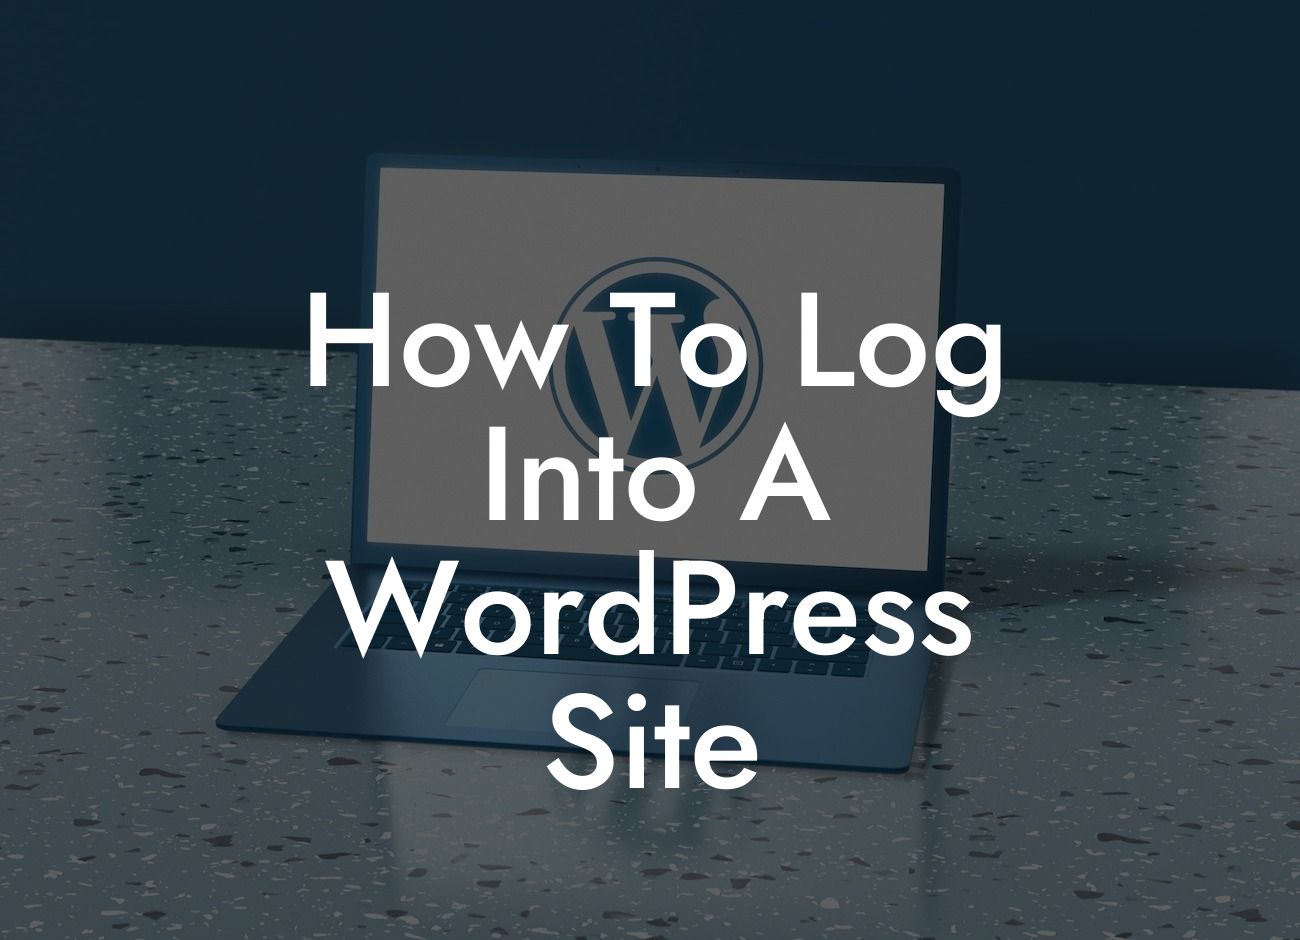 How To Log Into A WordPress Site